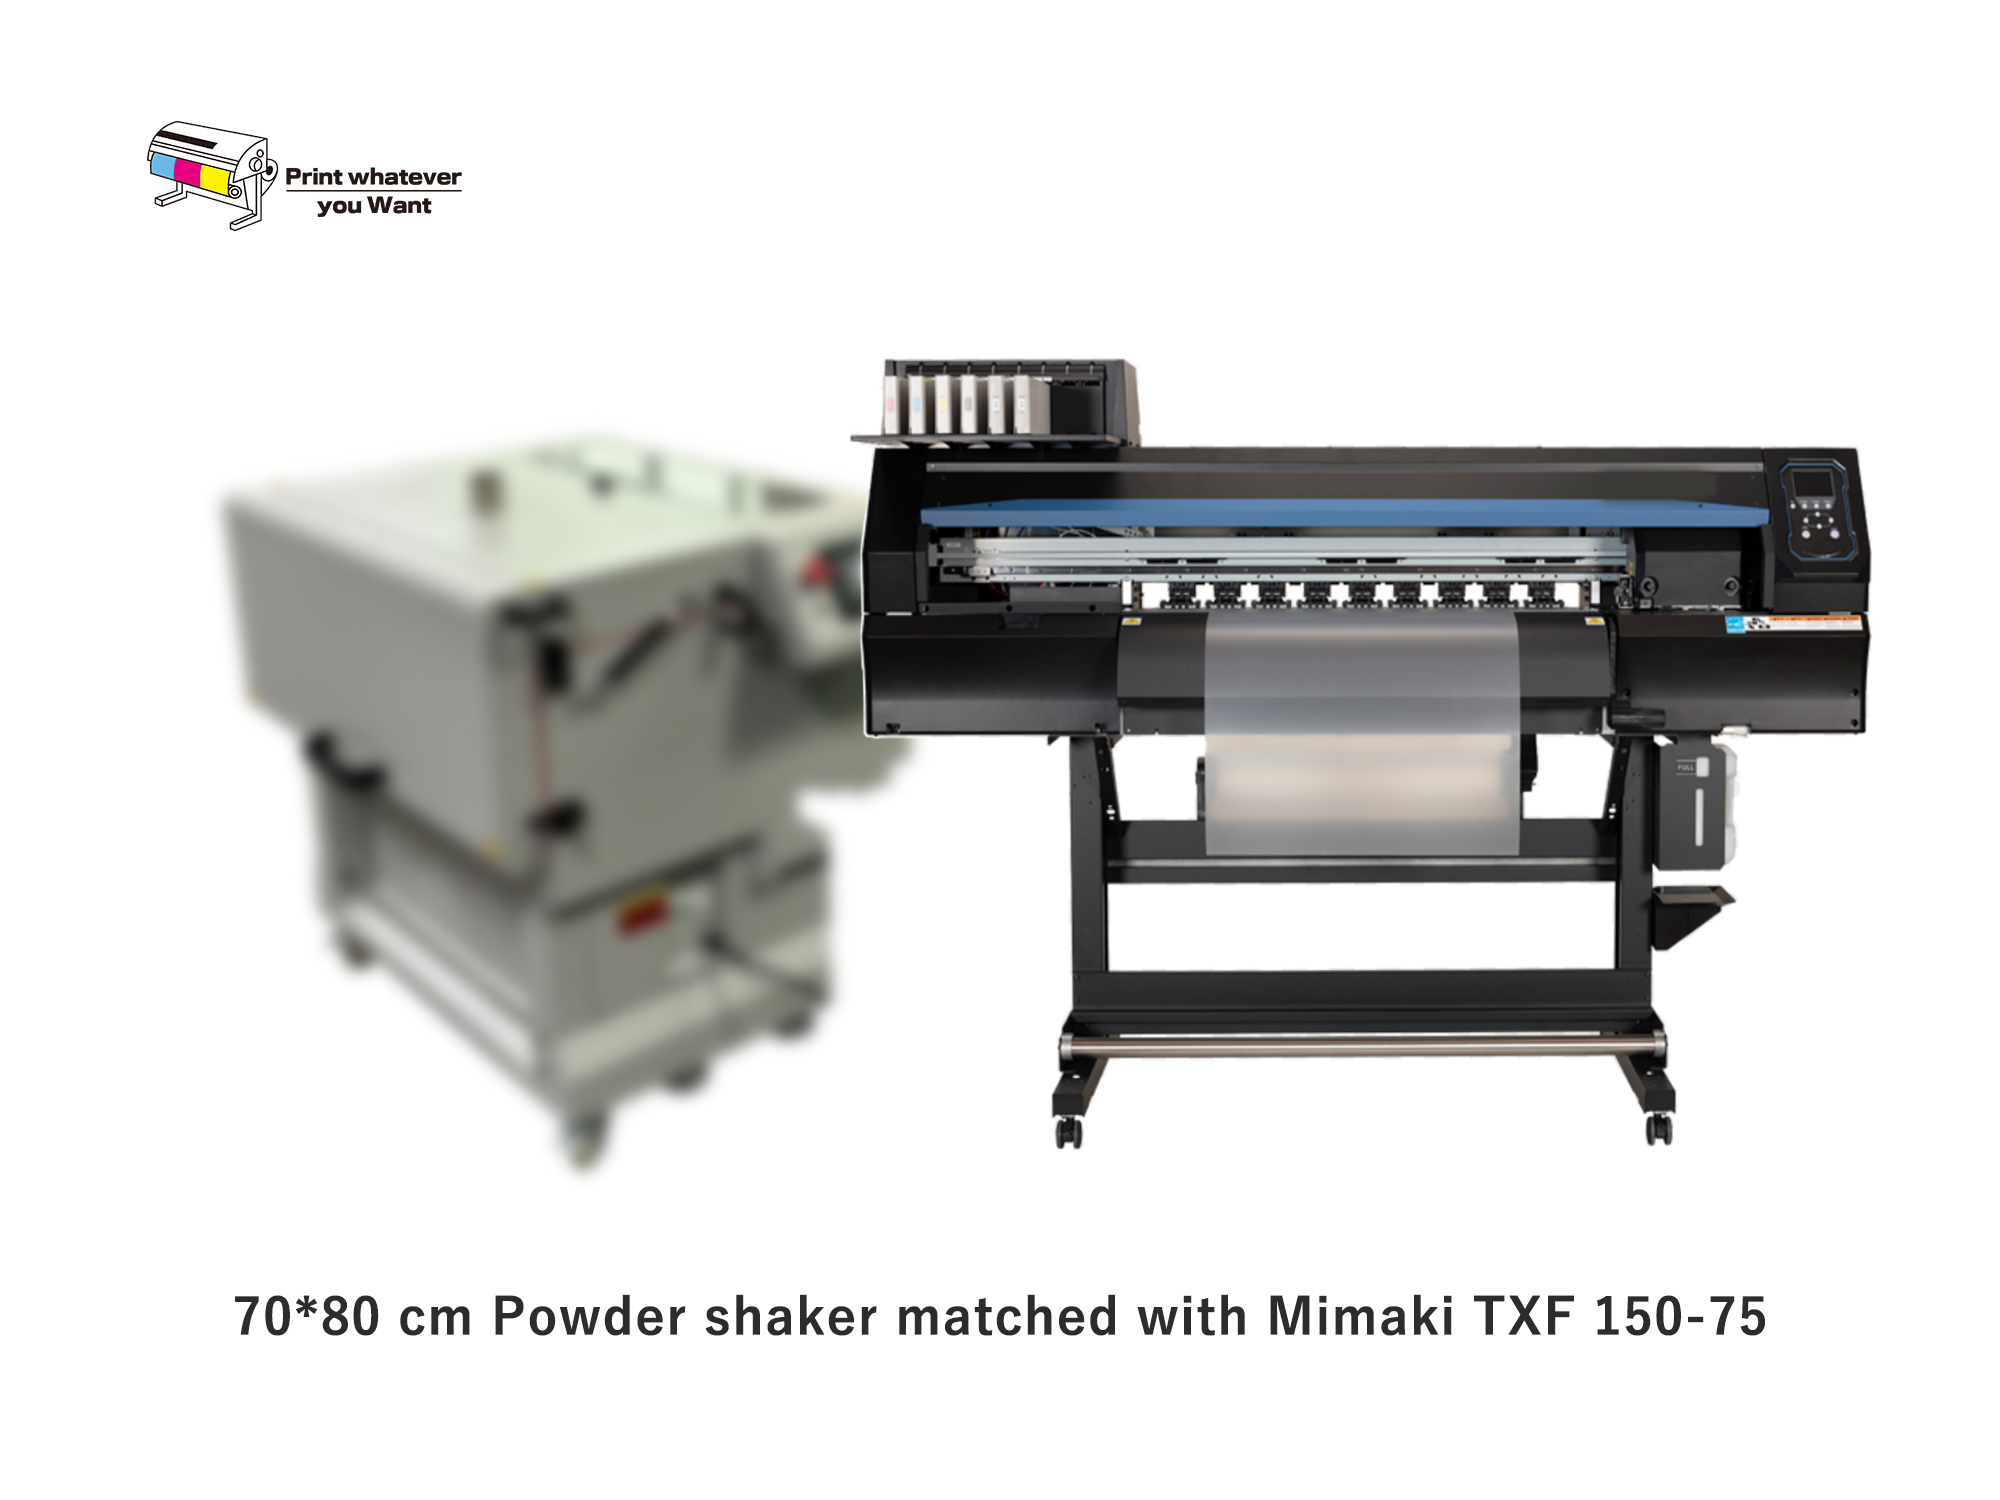 PrintWant new coming powder shaker matched with Mimaki TXF 150-75